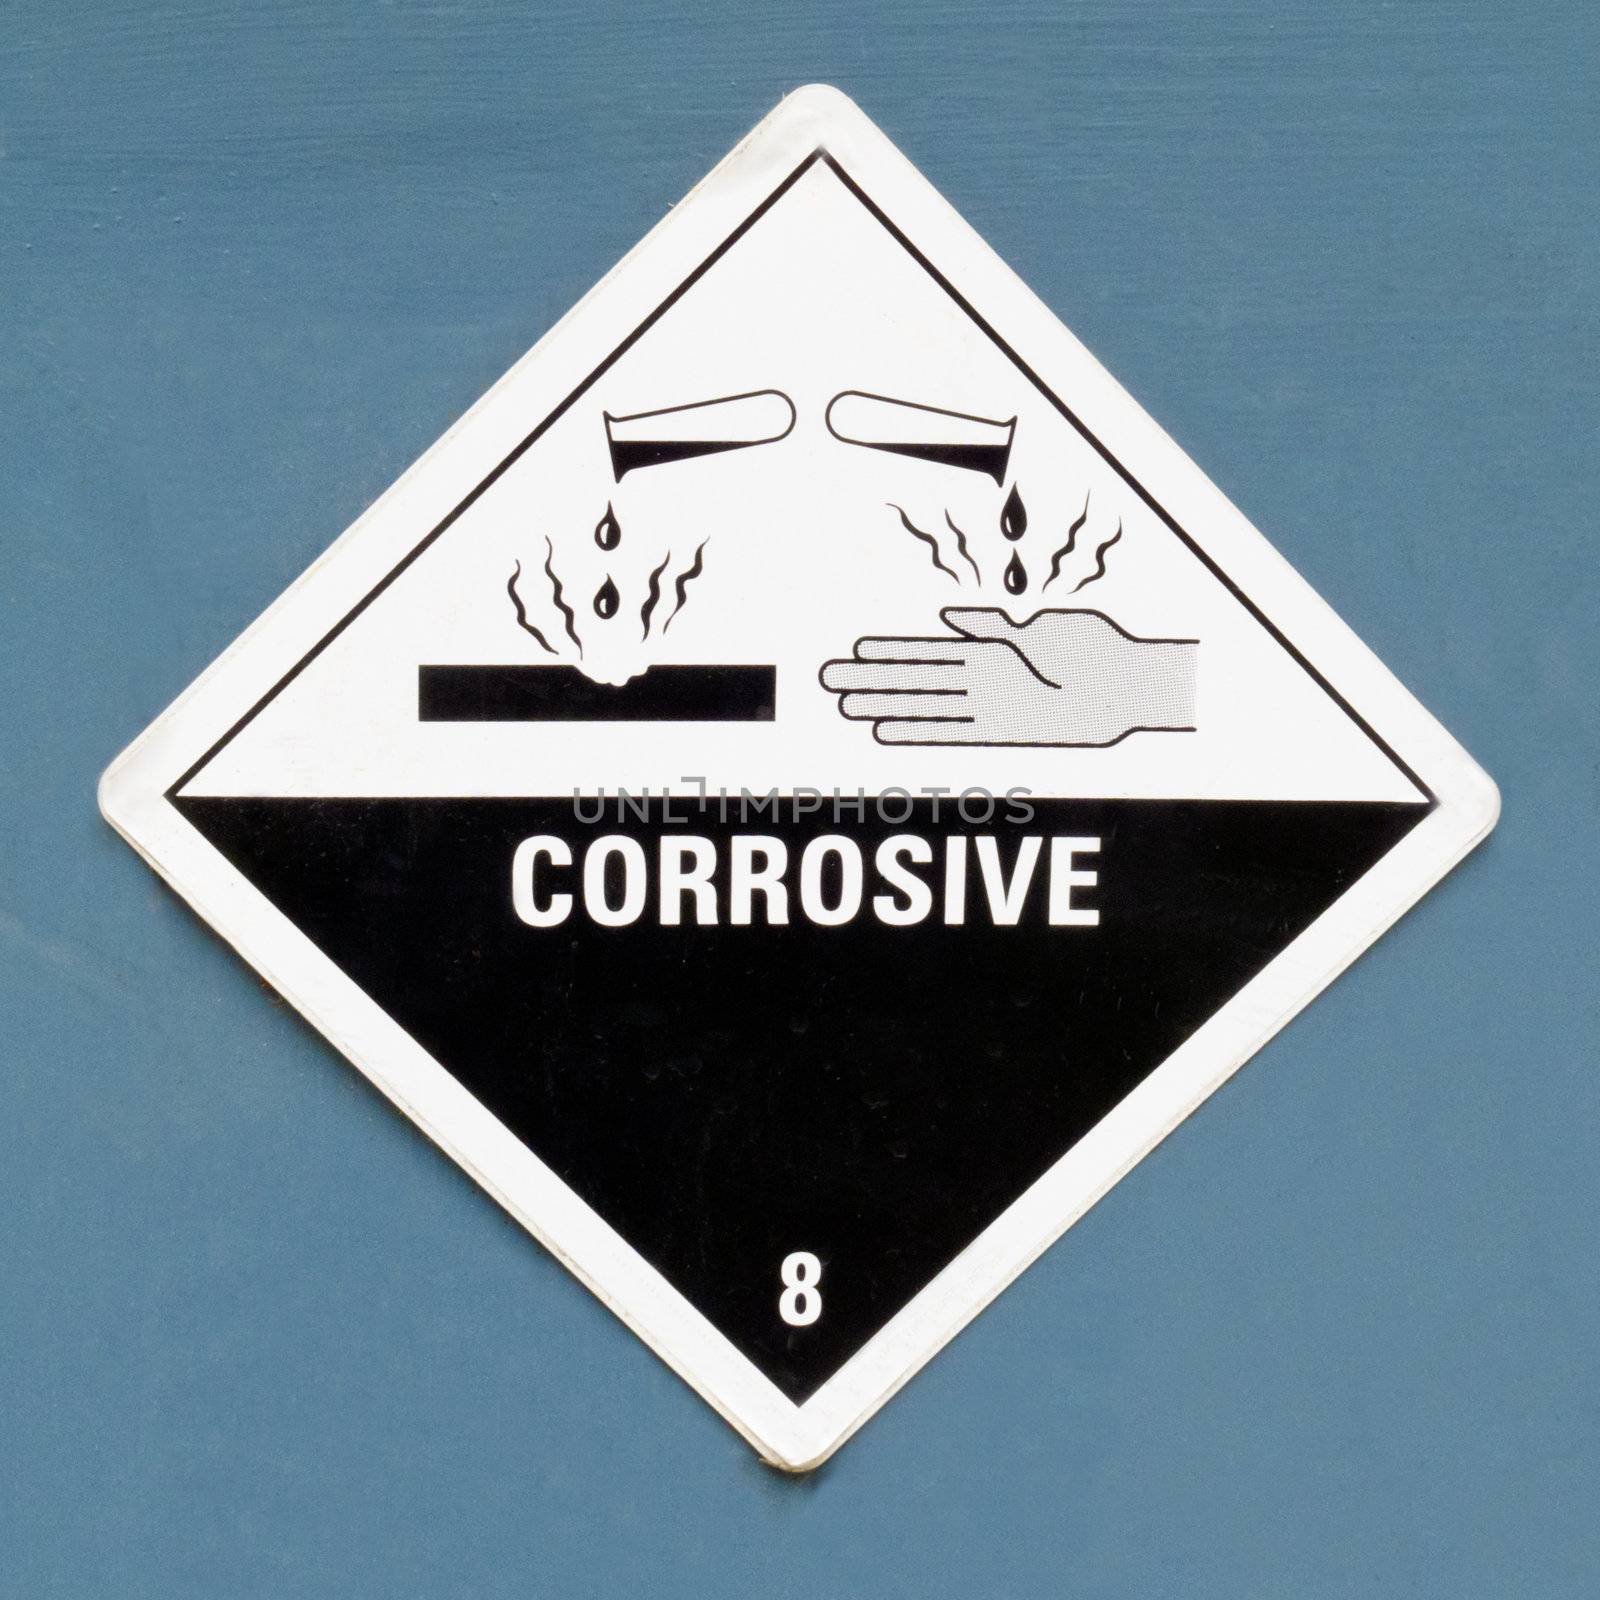 Corrosive, destroys living tissue on contact, hazard symbol or warning sign on a painted wall warning not to expose skin to substance